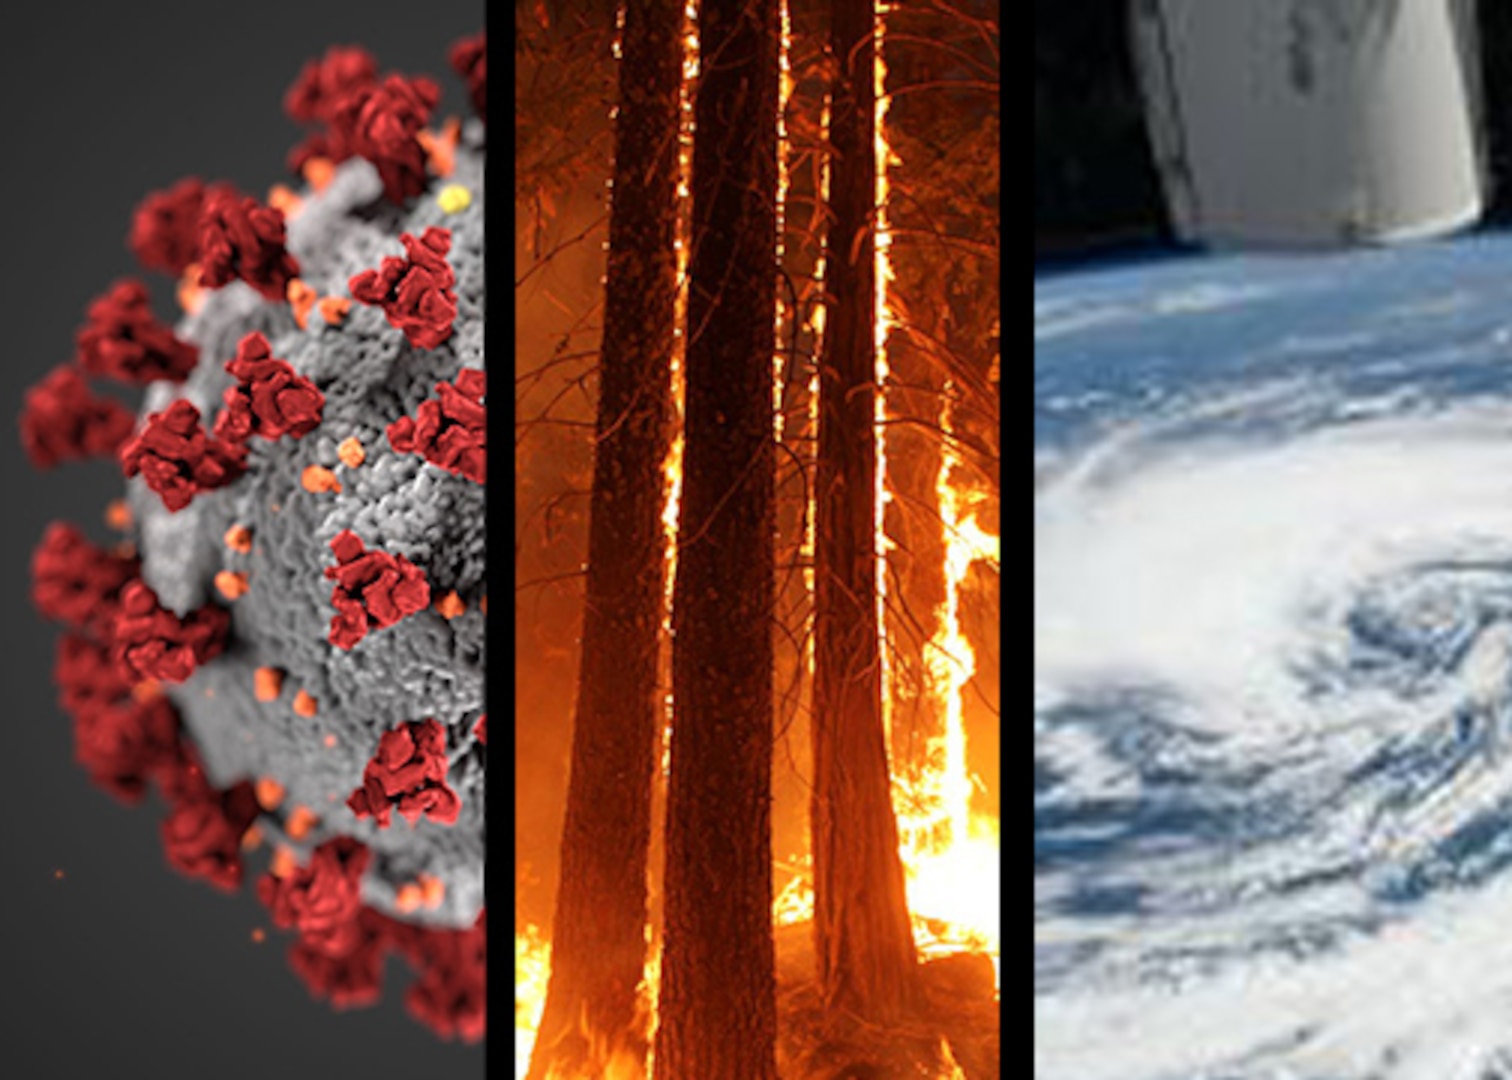 3 photos placed together, including the Covid-19 virus, trees on fire and a hurricane from space.